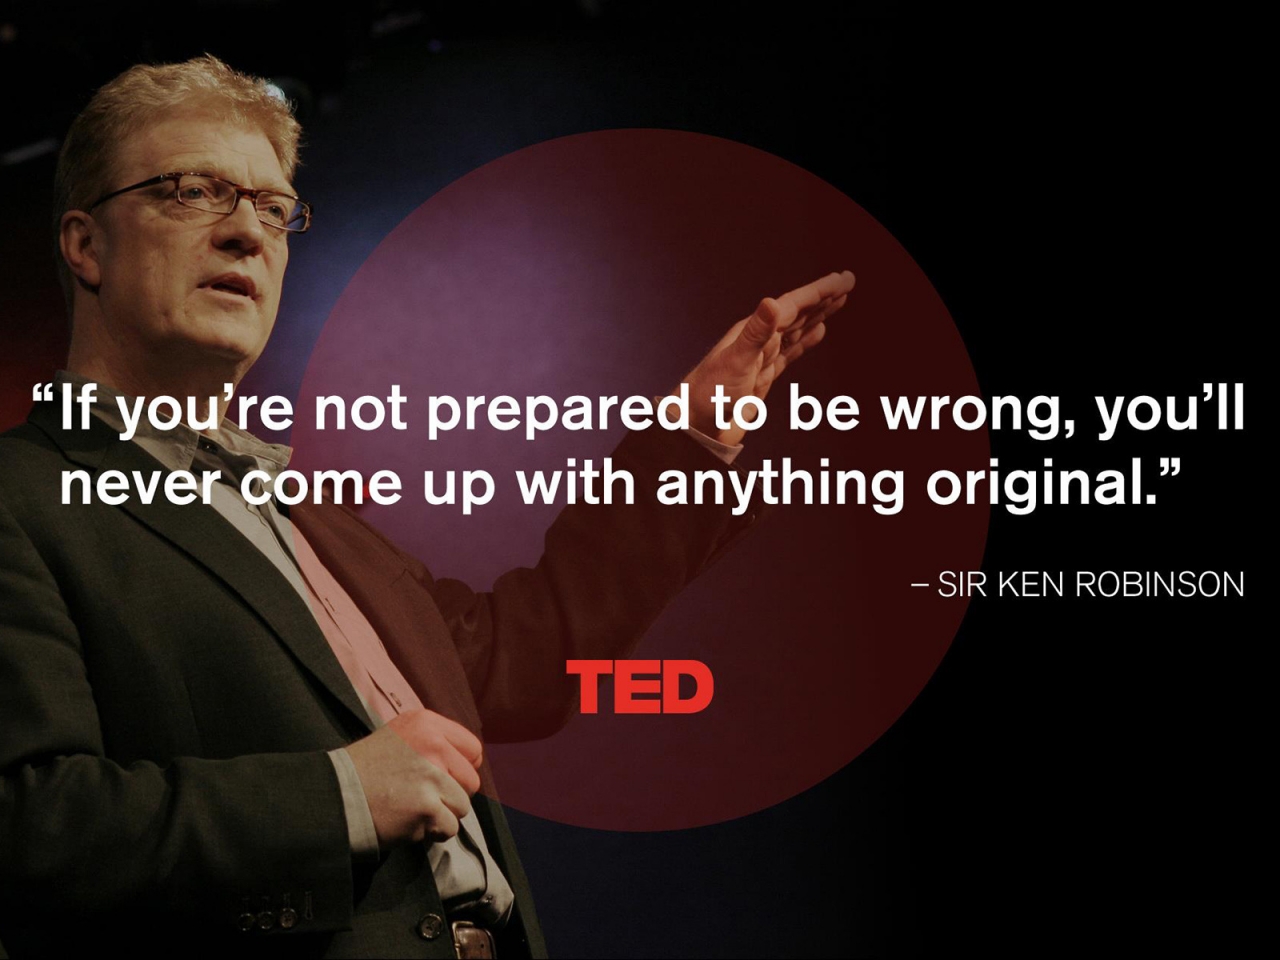 Sir Ken Robinson Quote for 1280 x 960 resolution